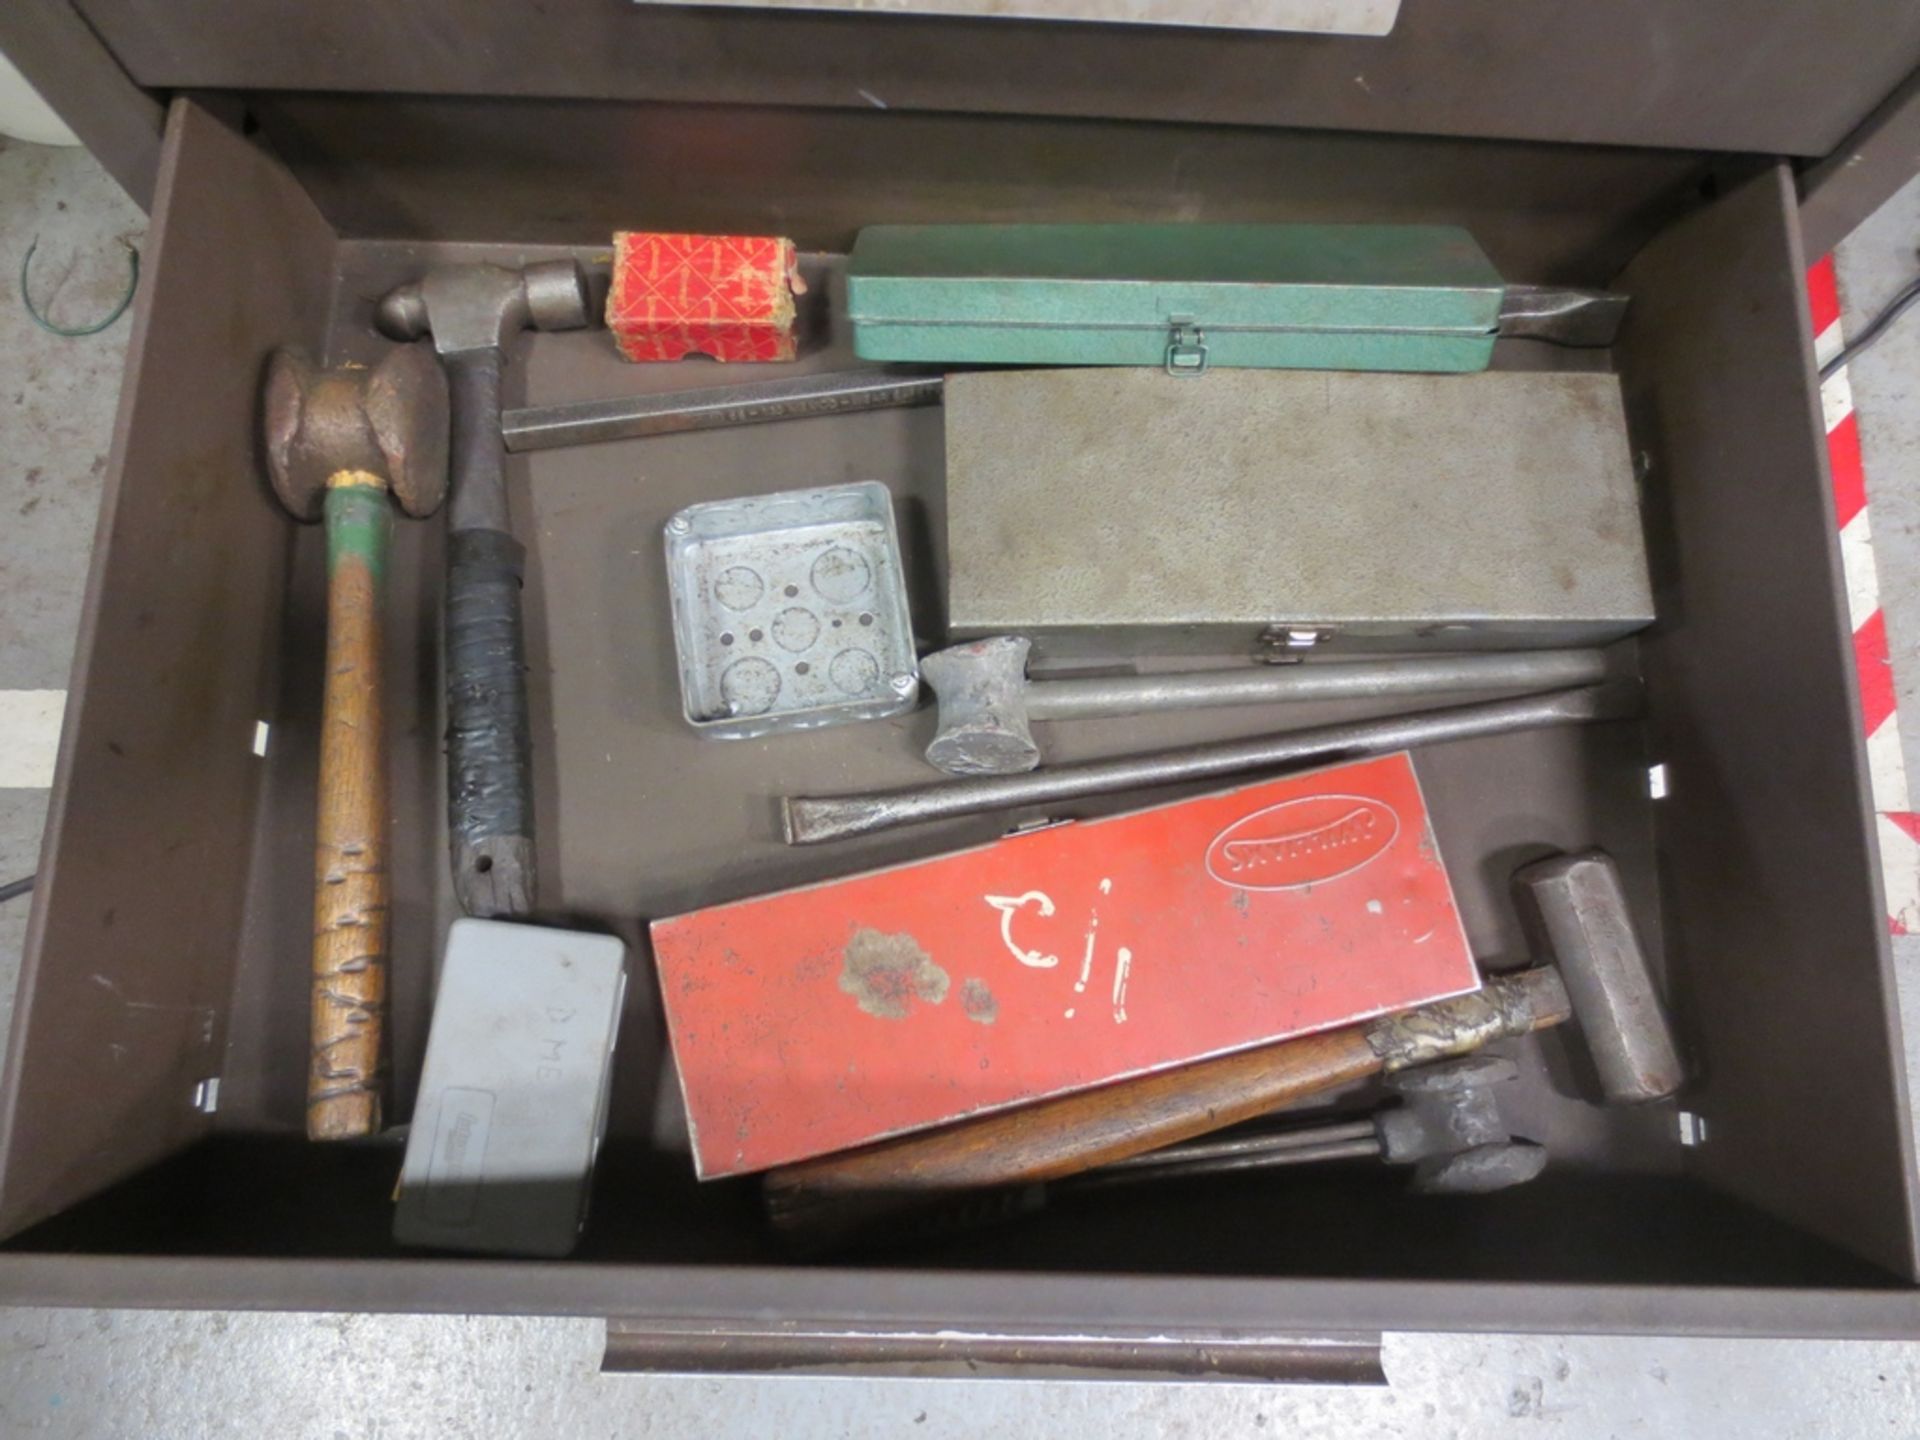 KENNEDY TOOL BOX WITH CONTENTS OF TOOLS, BOLTS, SCREWS, SEALS ETC. - Image 6 of 6